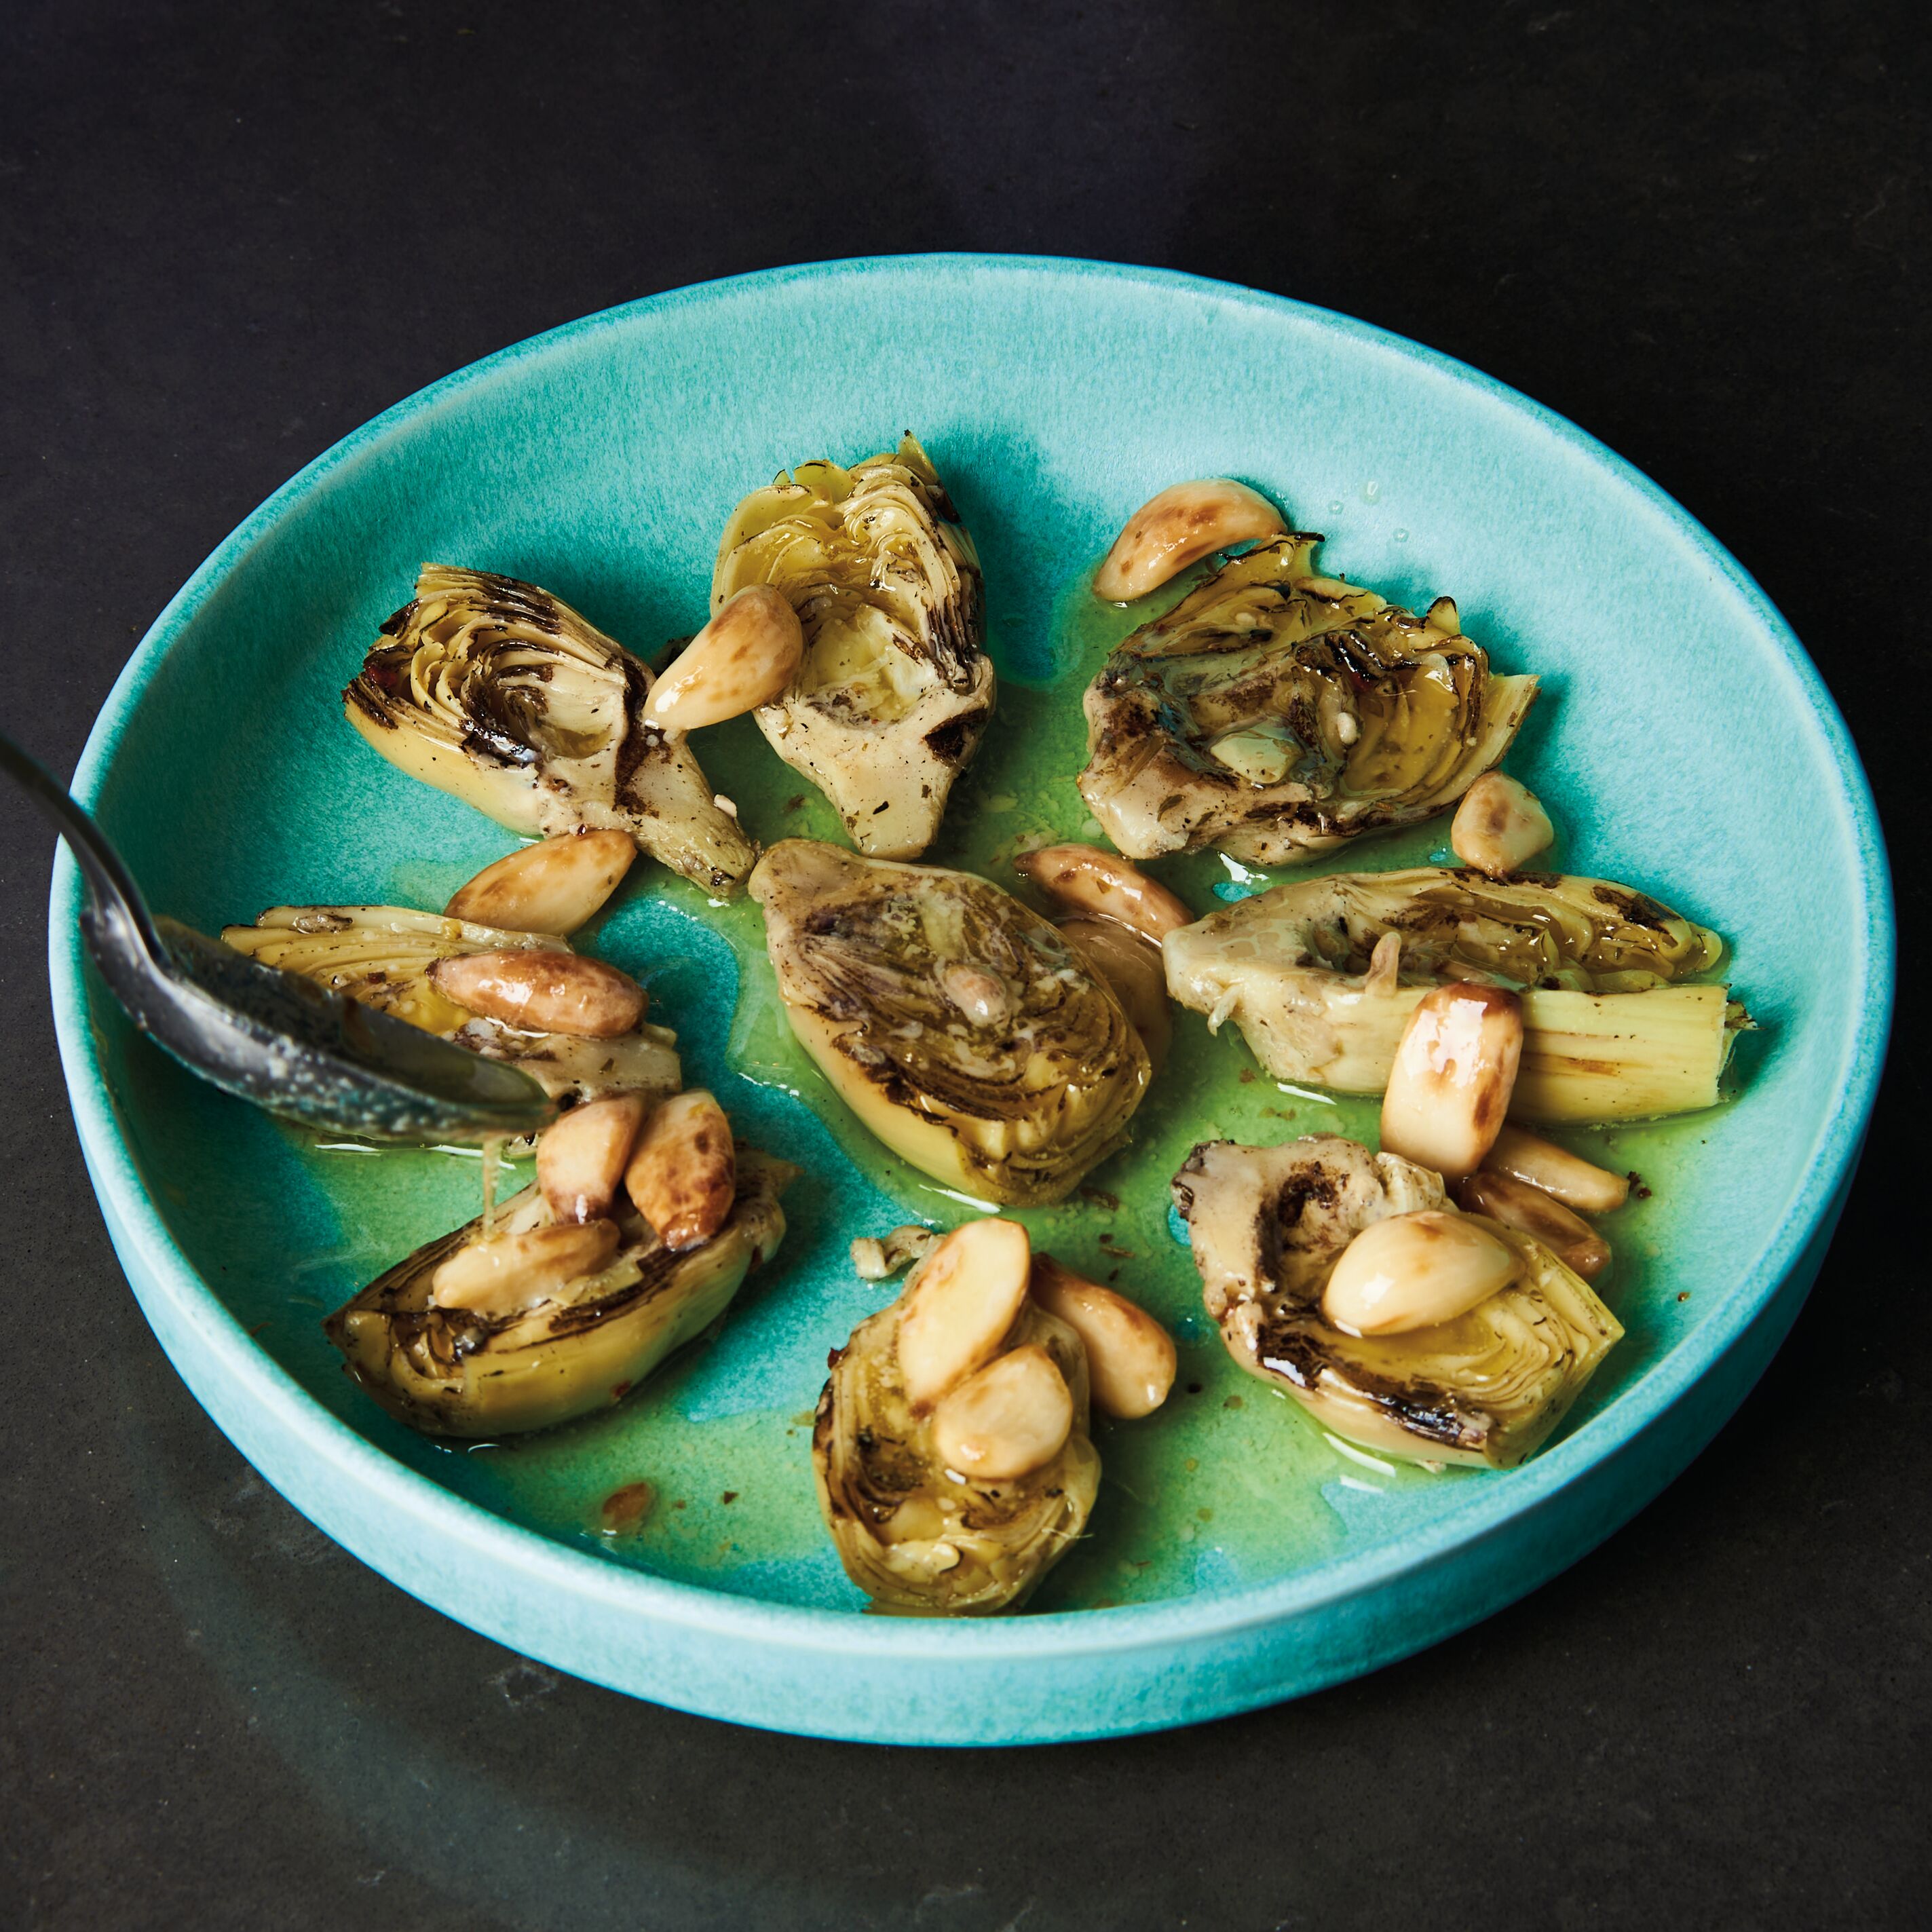 Grilled artichokes arranged on a blue plate with roasted garlic cloves and lemon garlic butter being drizzled with a spoon